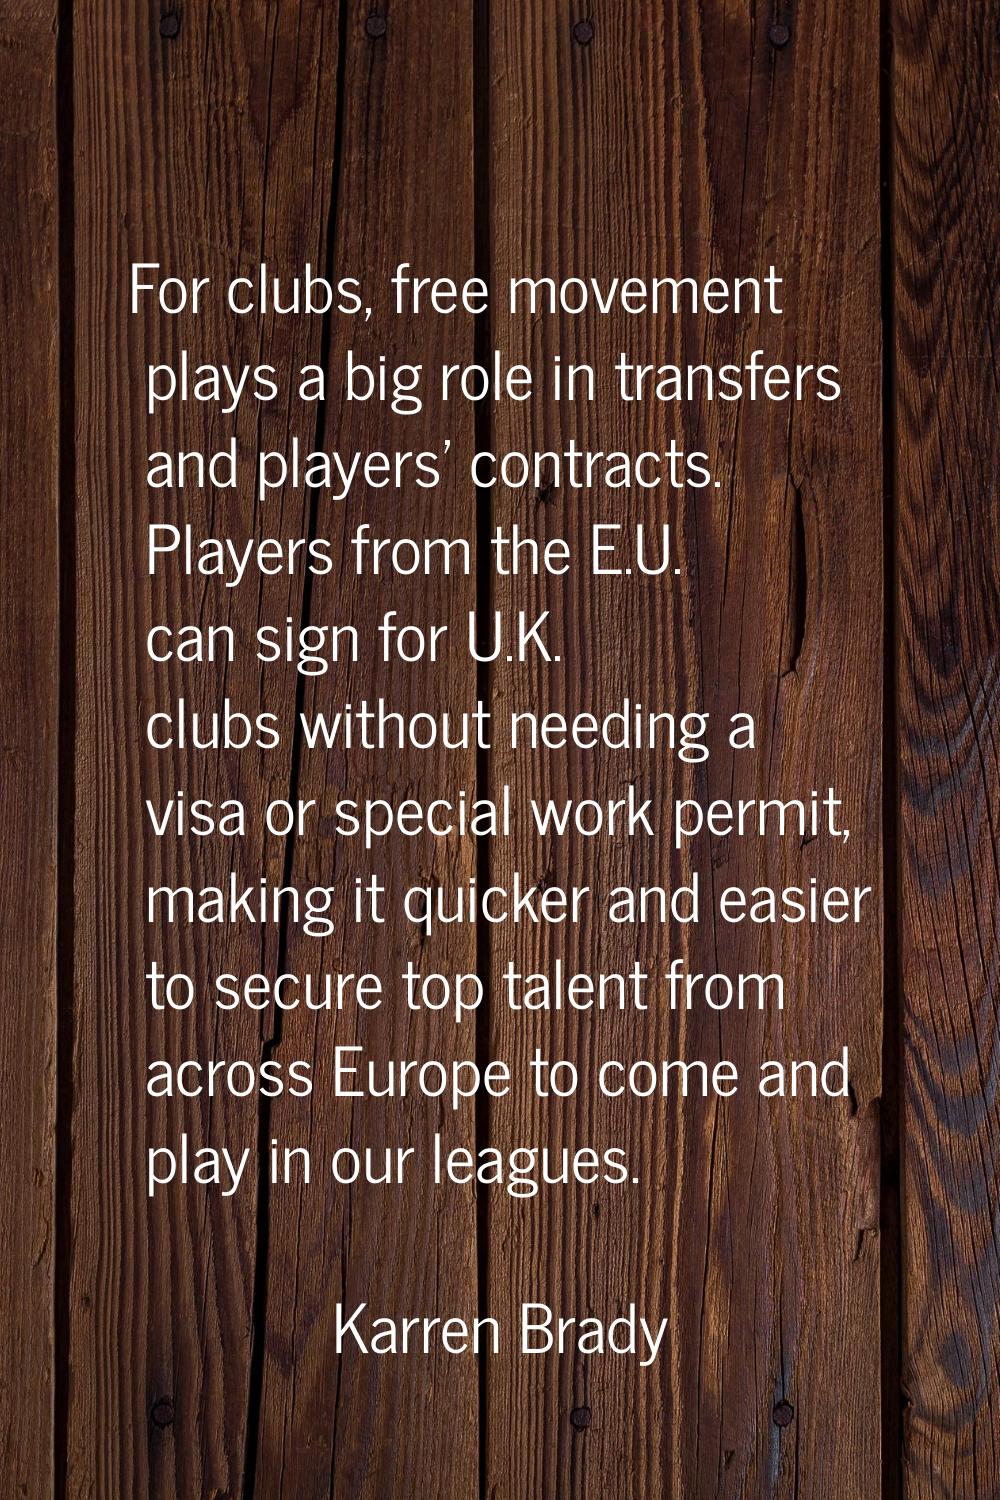 For clubs, free movement plays a big role in transfers and players' contracts. Players from the E.U